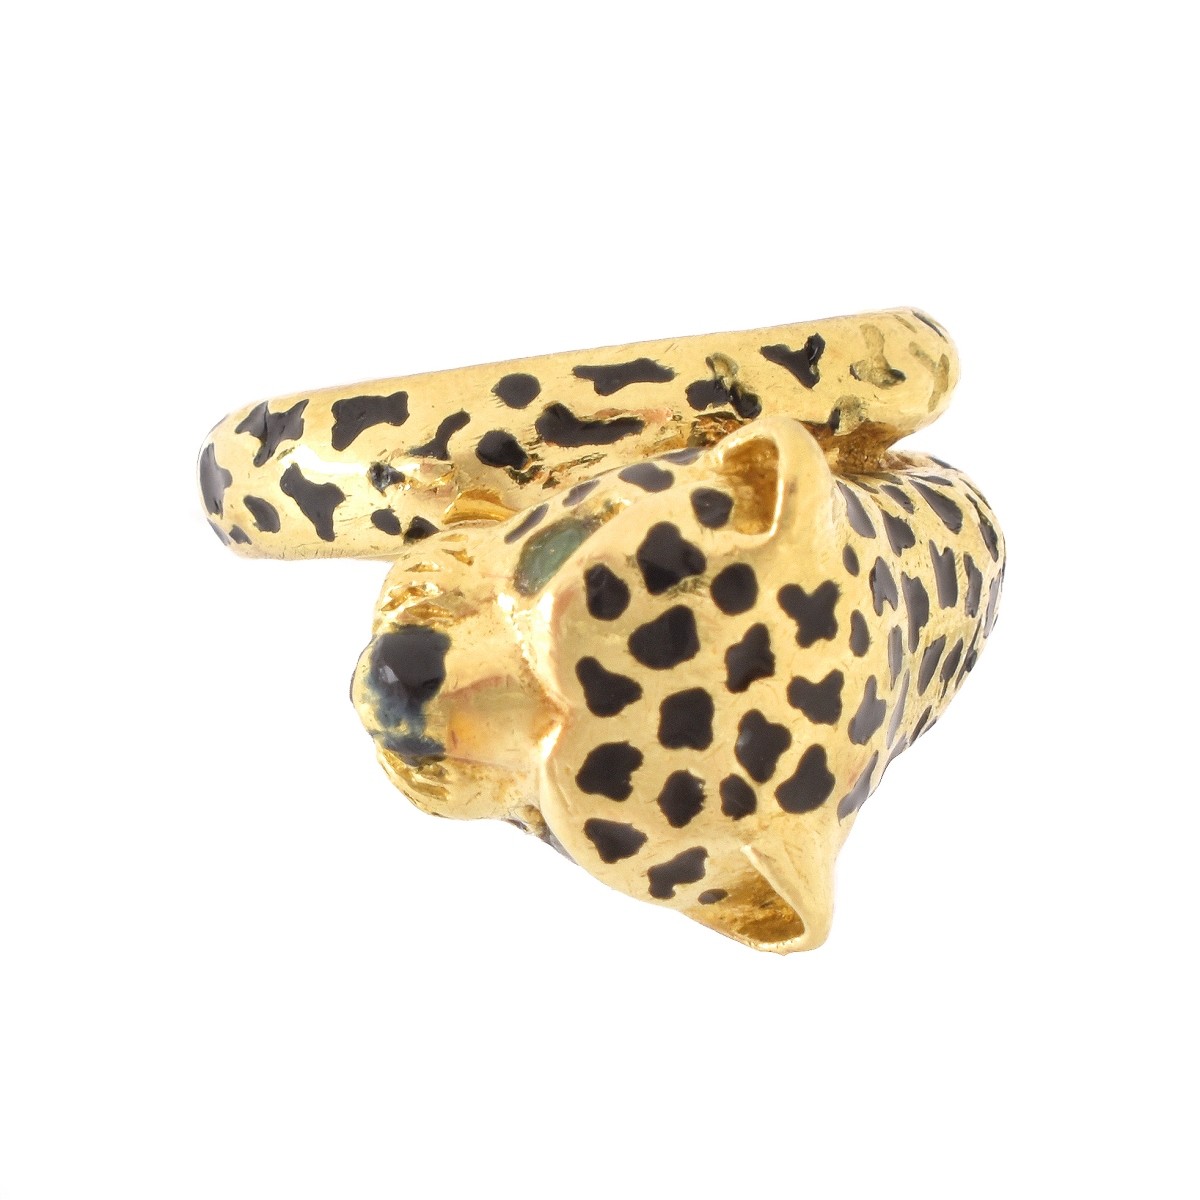 Cartier style 18K Ring